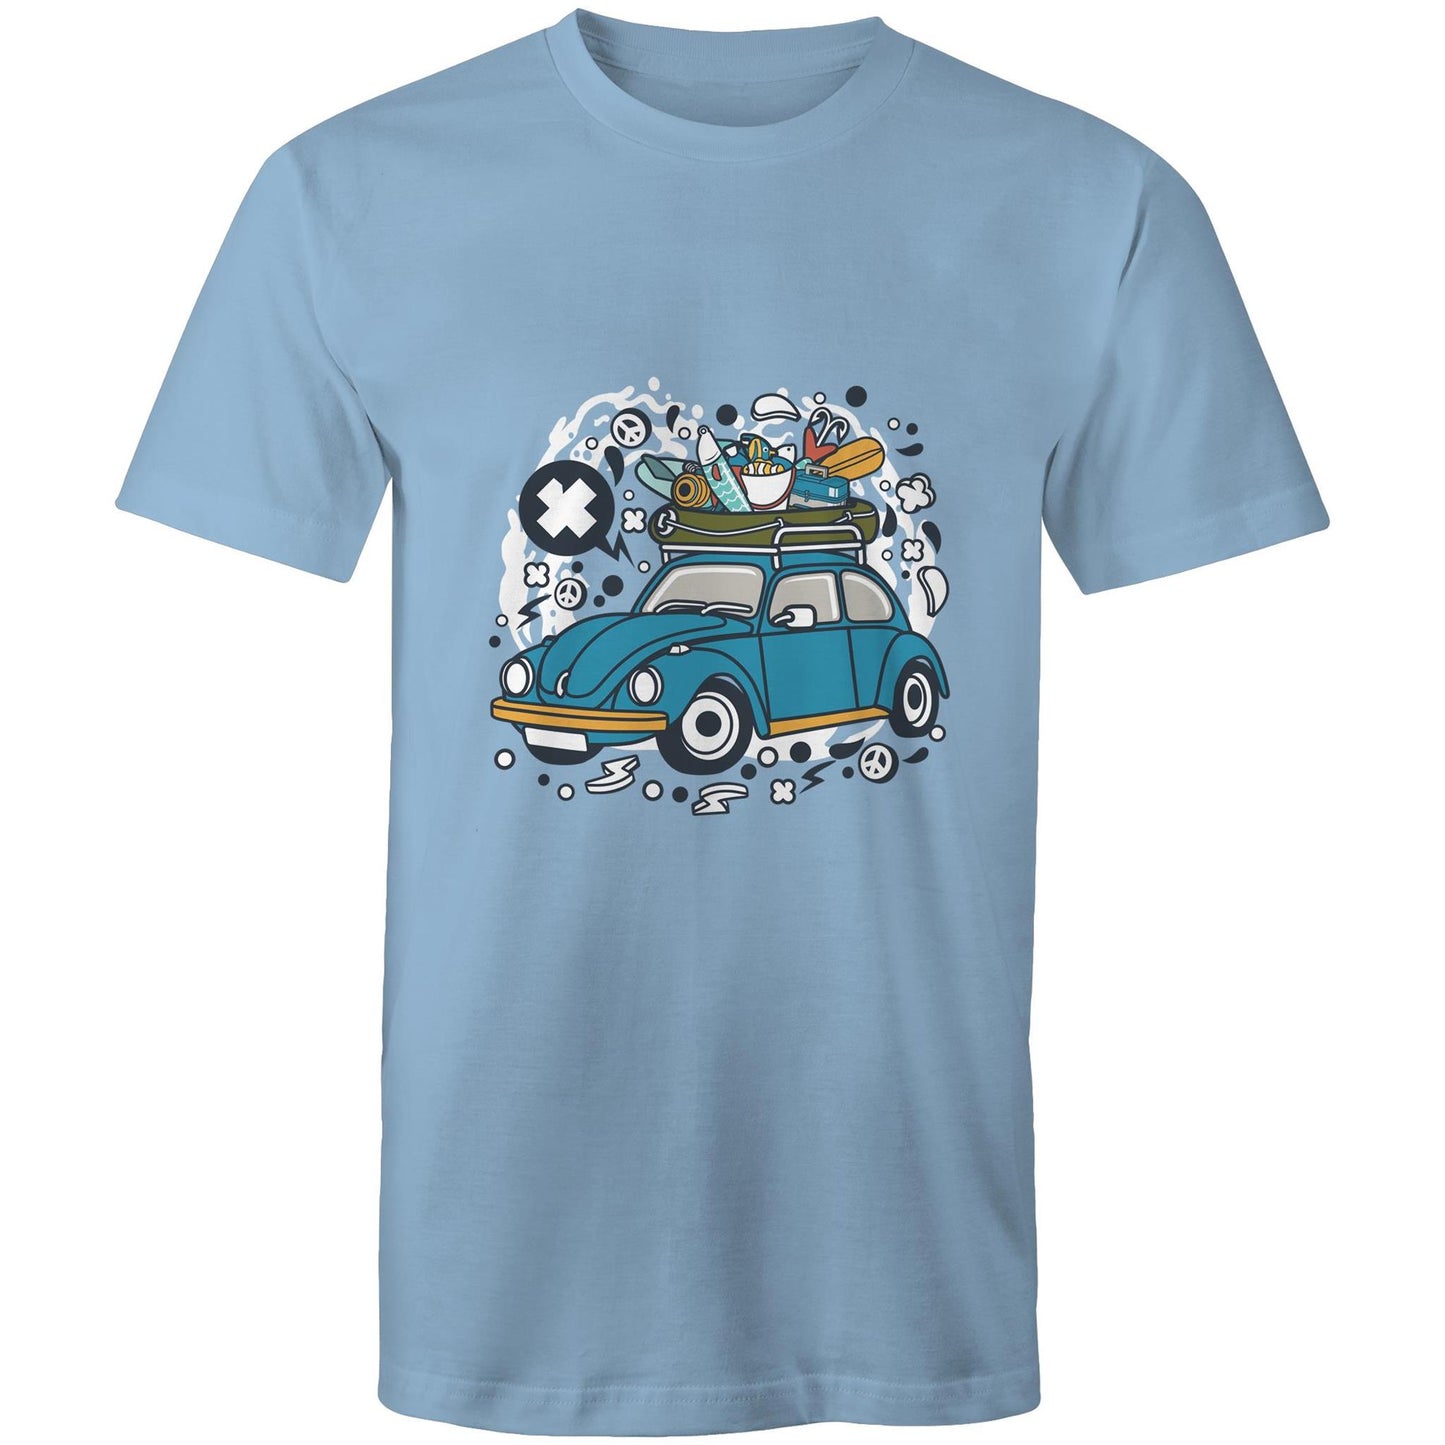 Going Fishing in Style - Mens T-Shirt